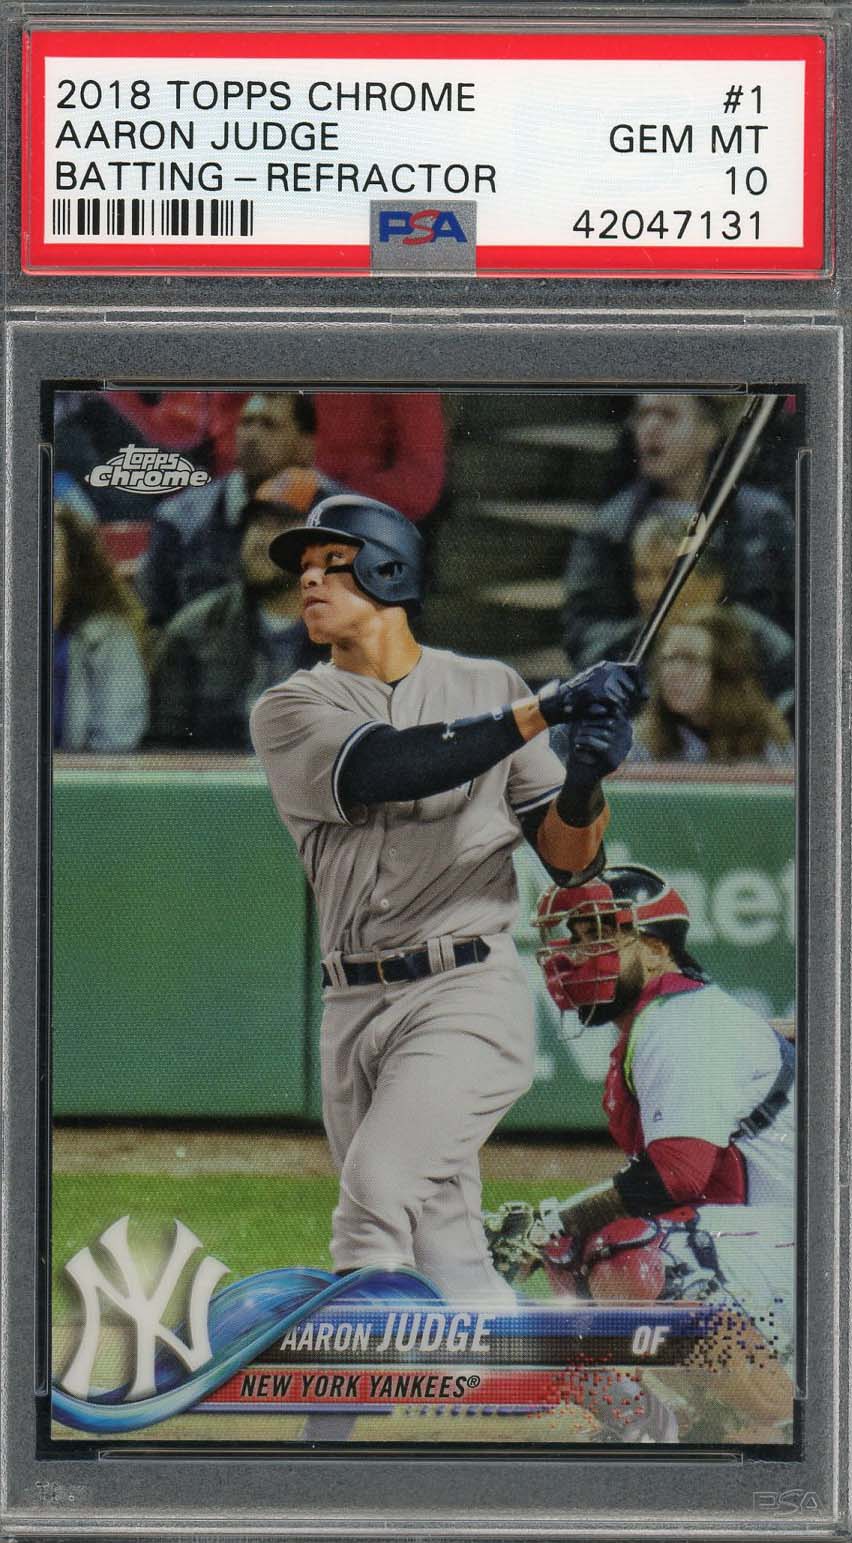 2021 Bowman #74 Aaron Judge New York Yankees Official MLB Baseball Trading  Card in Raw (NM or Better) Condition